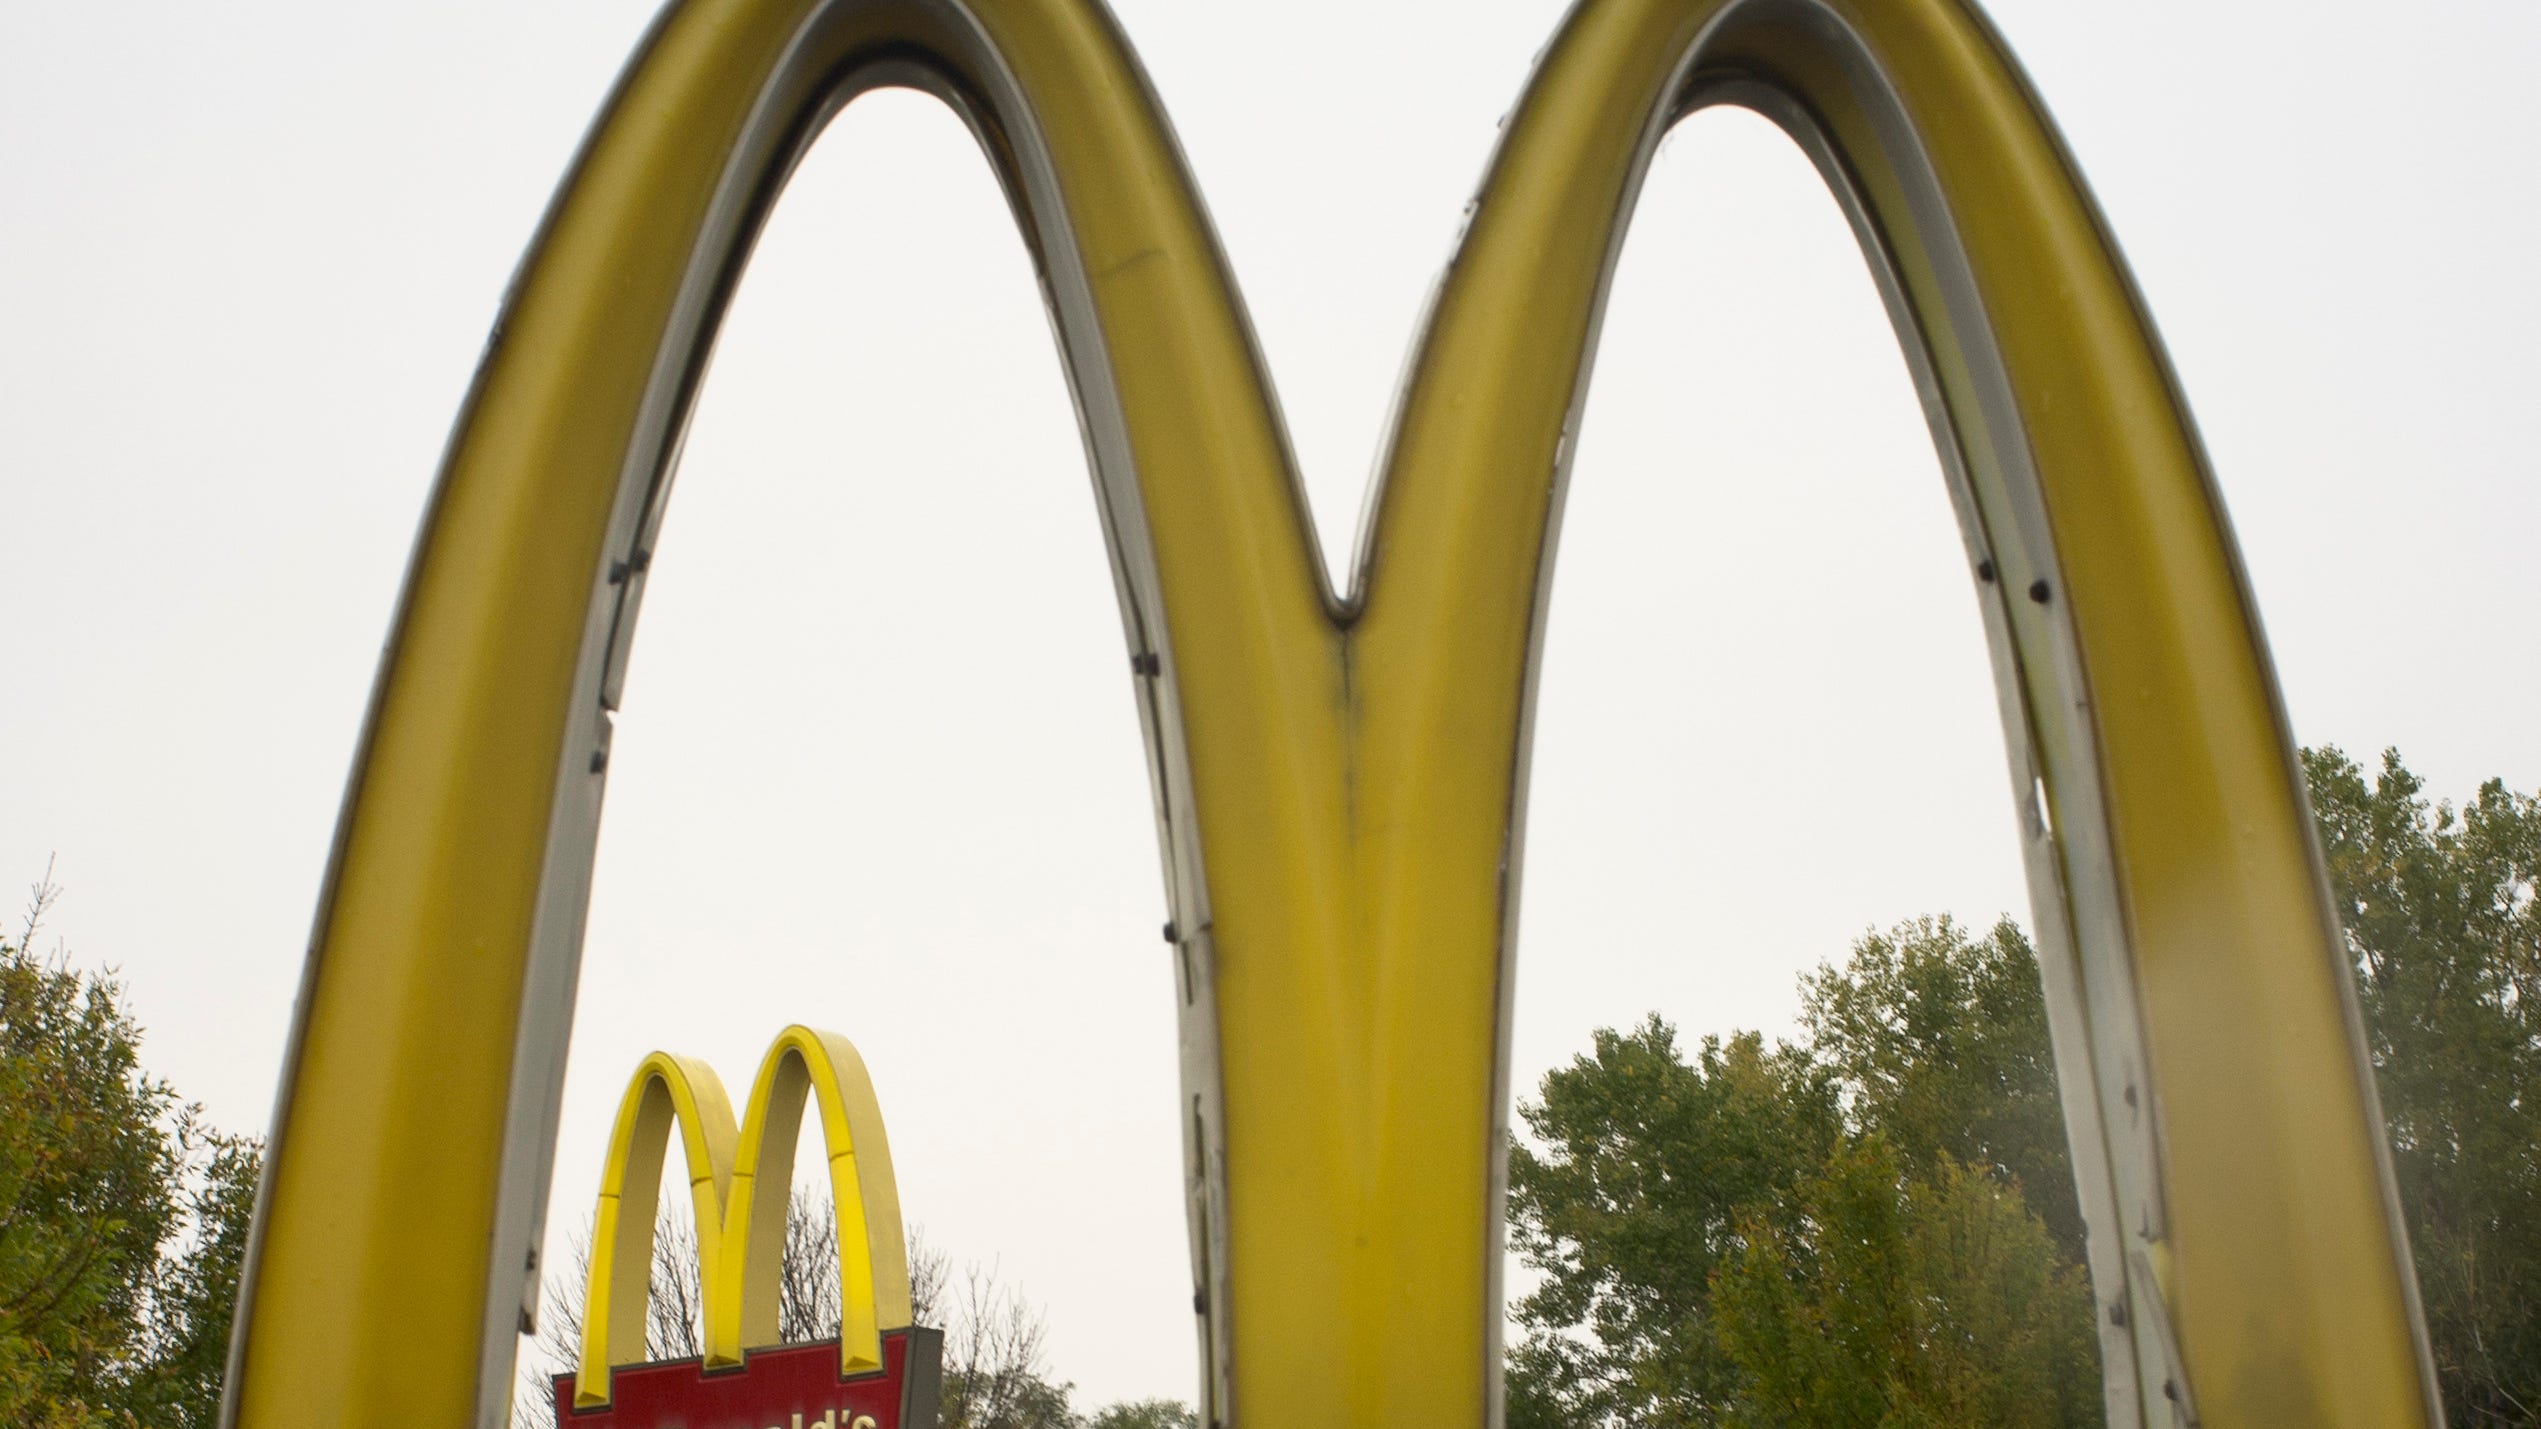 Wisconsin Dells McDonald's named one of the 'most beautiful' in the world by Architectural Digest